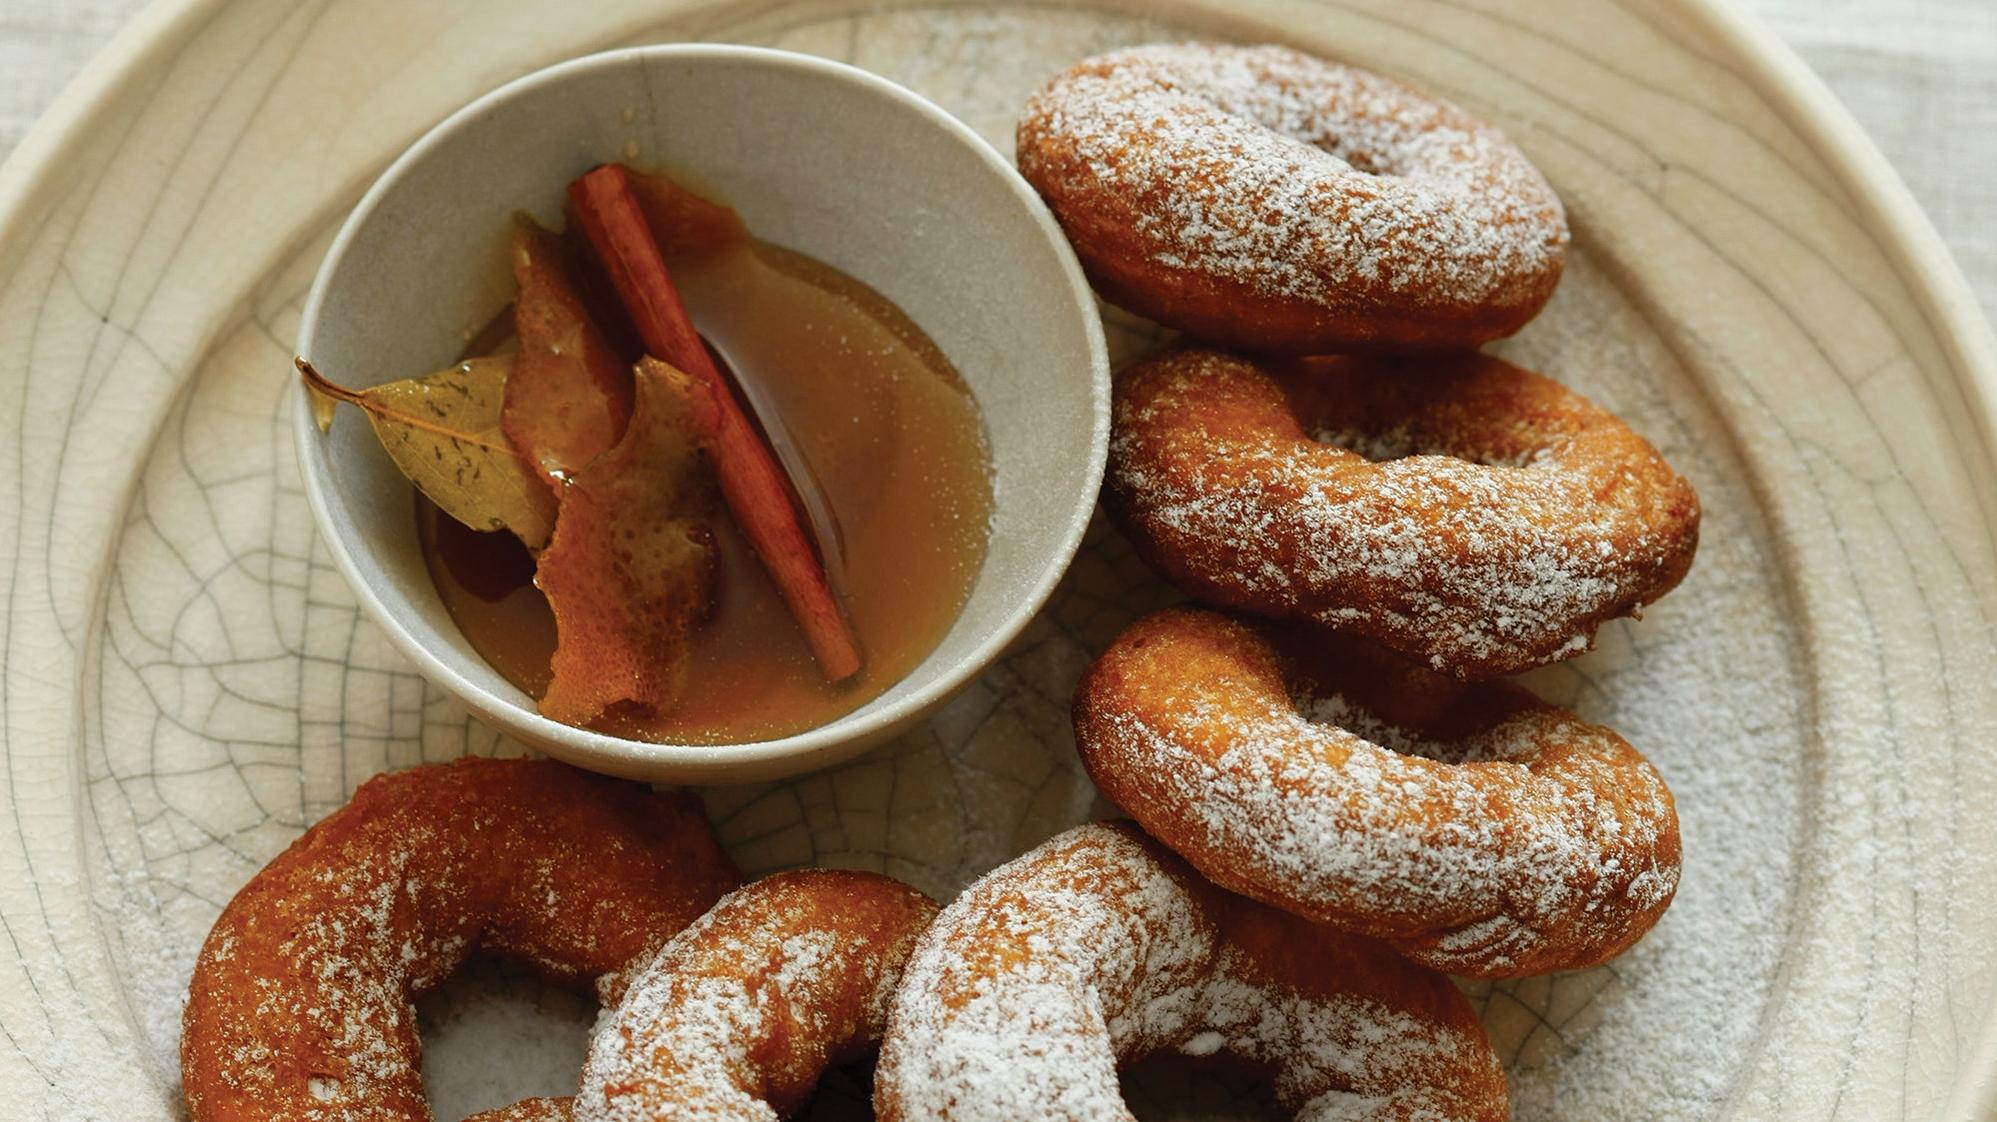  Served piping hot, these fried dough rings make the perfect winter warmer.